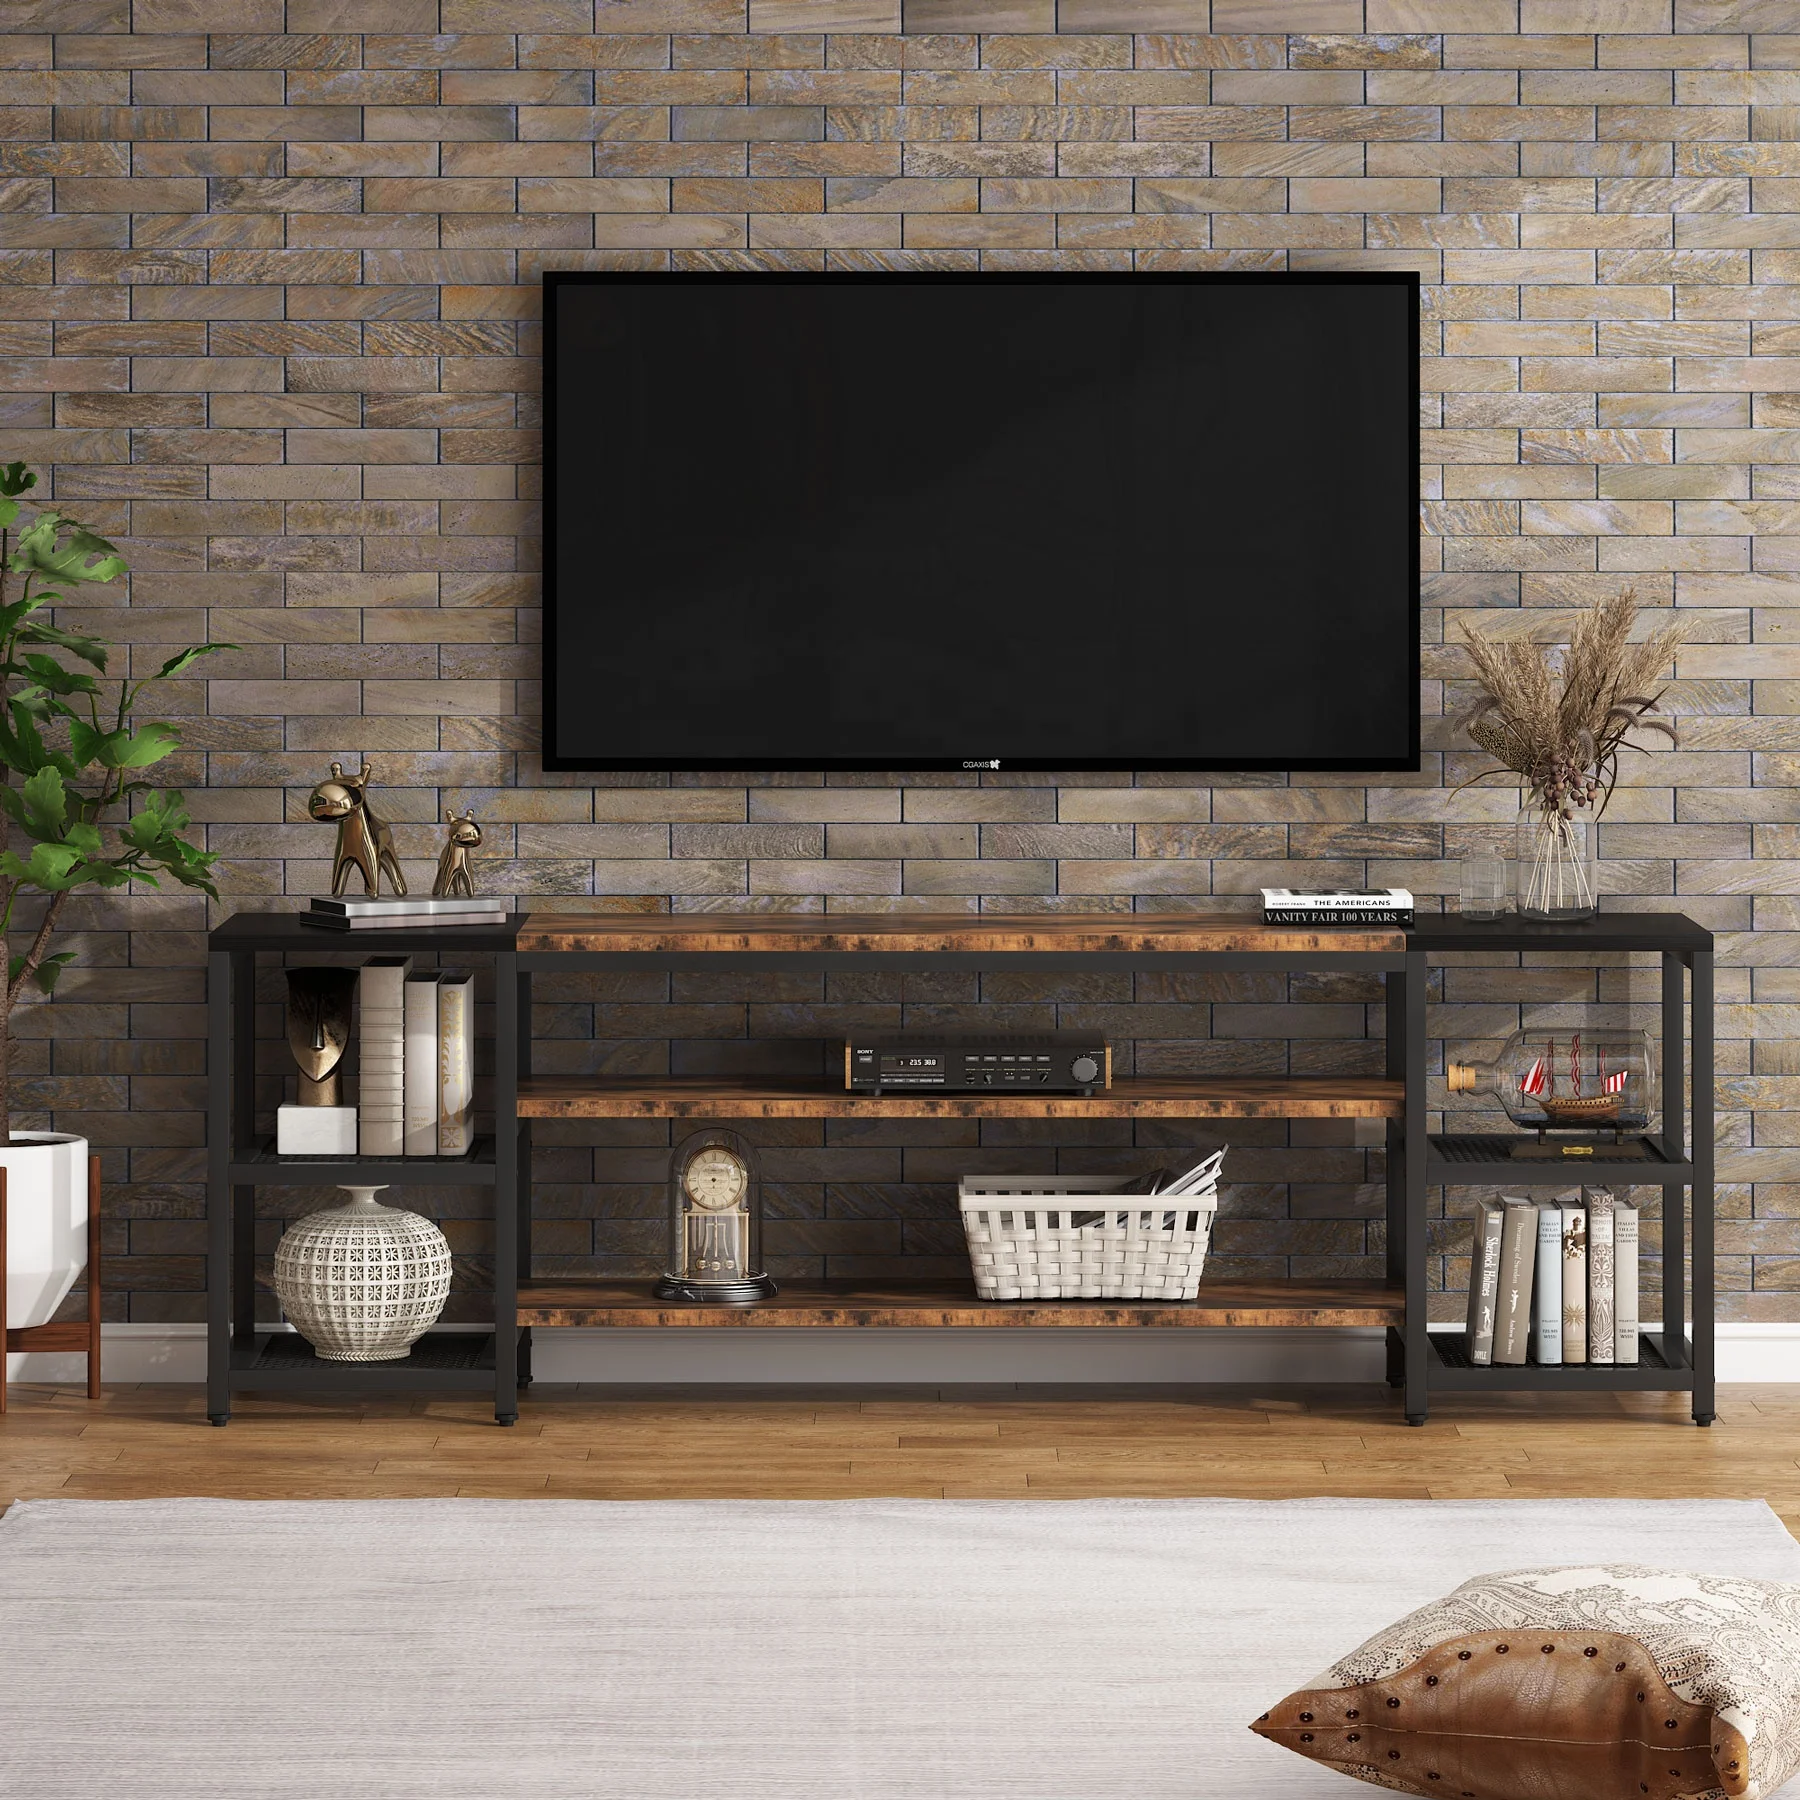 Tribesigns Industrial TV Stand Console Table with Storage Shelves 3-Tier Media Entertainment Center for TV up to 85